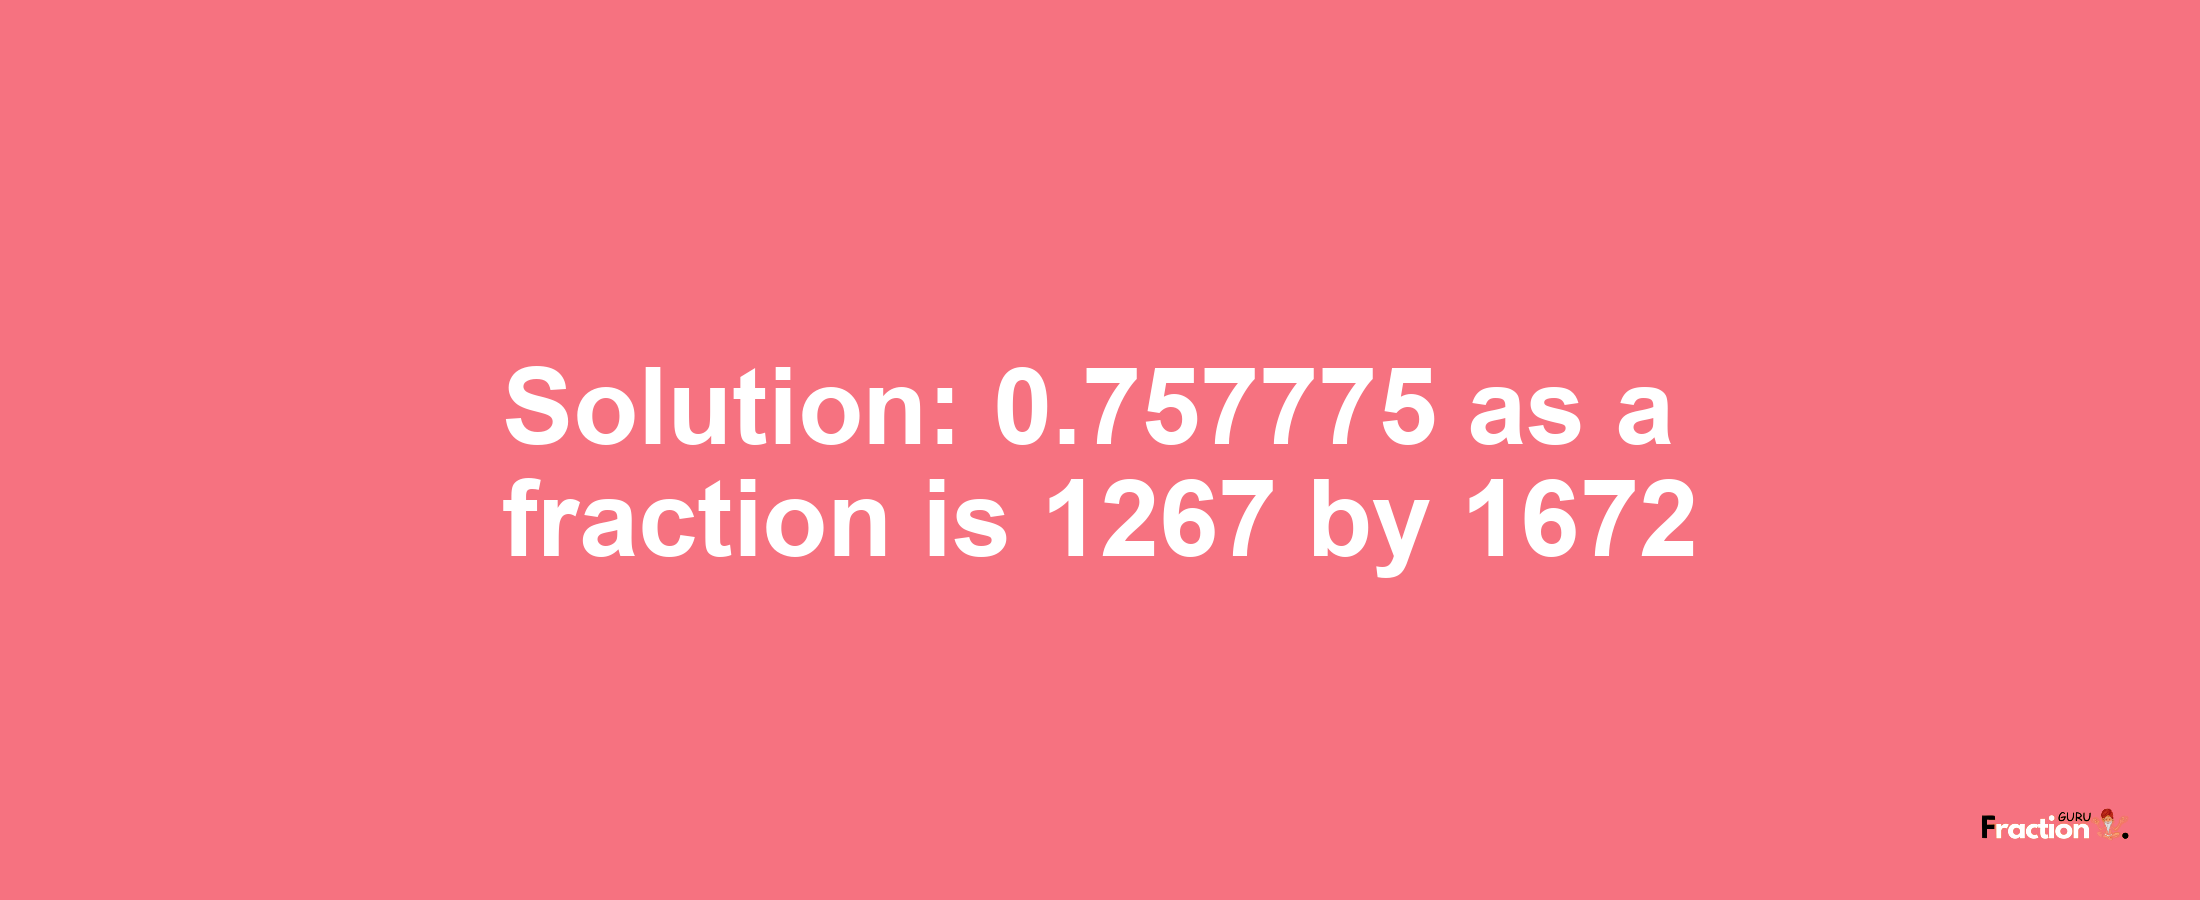 Solution:0.757775 as a fraction is 1267/1672